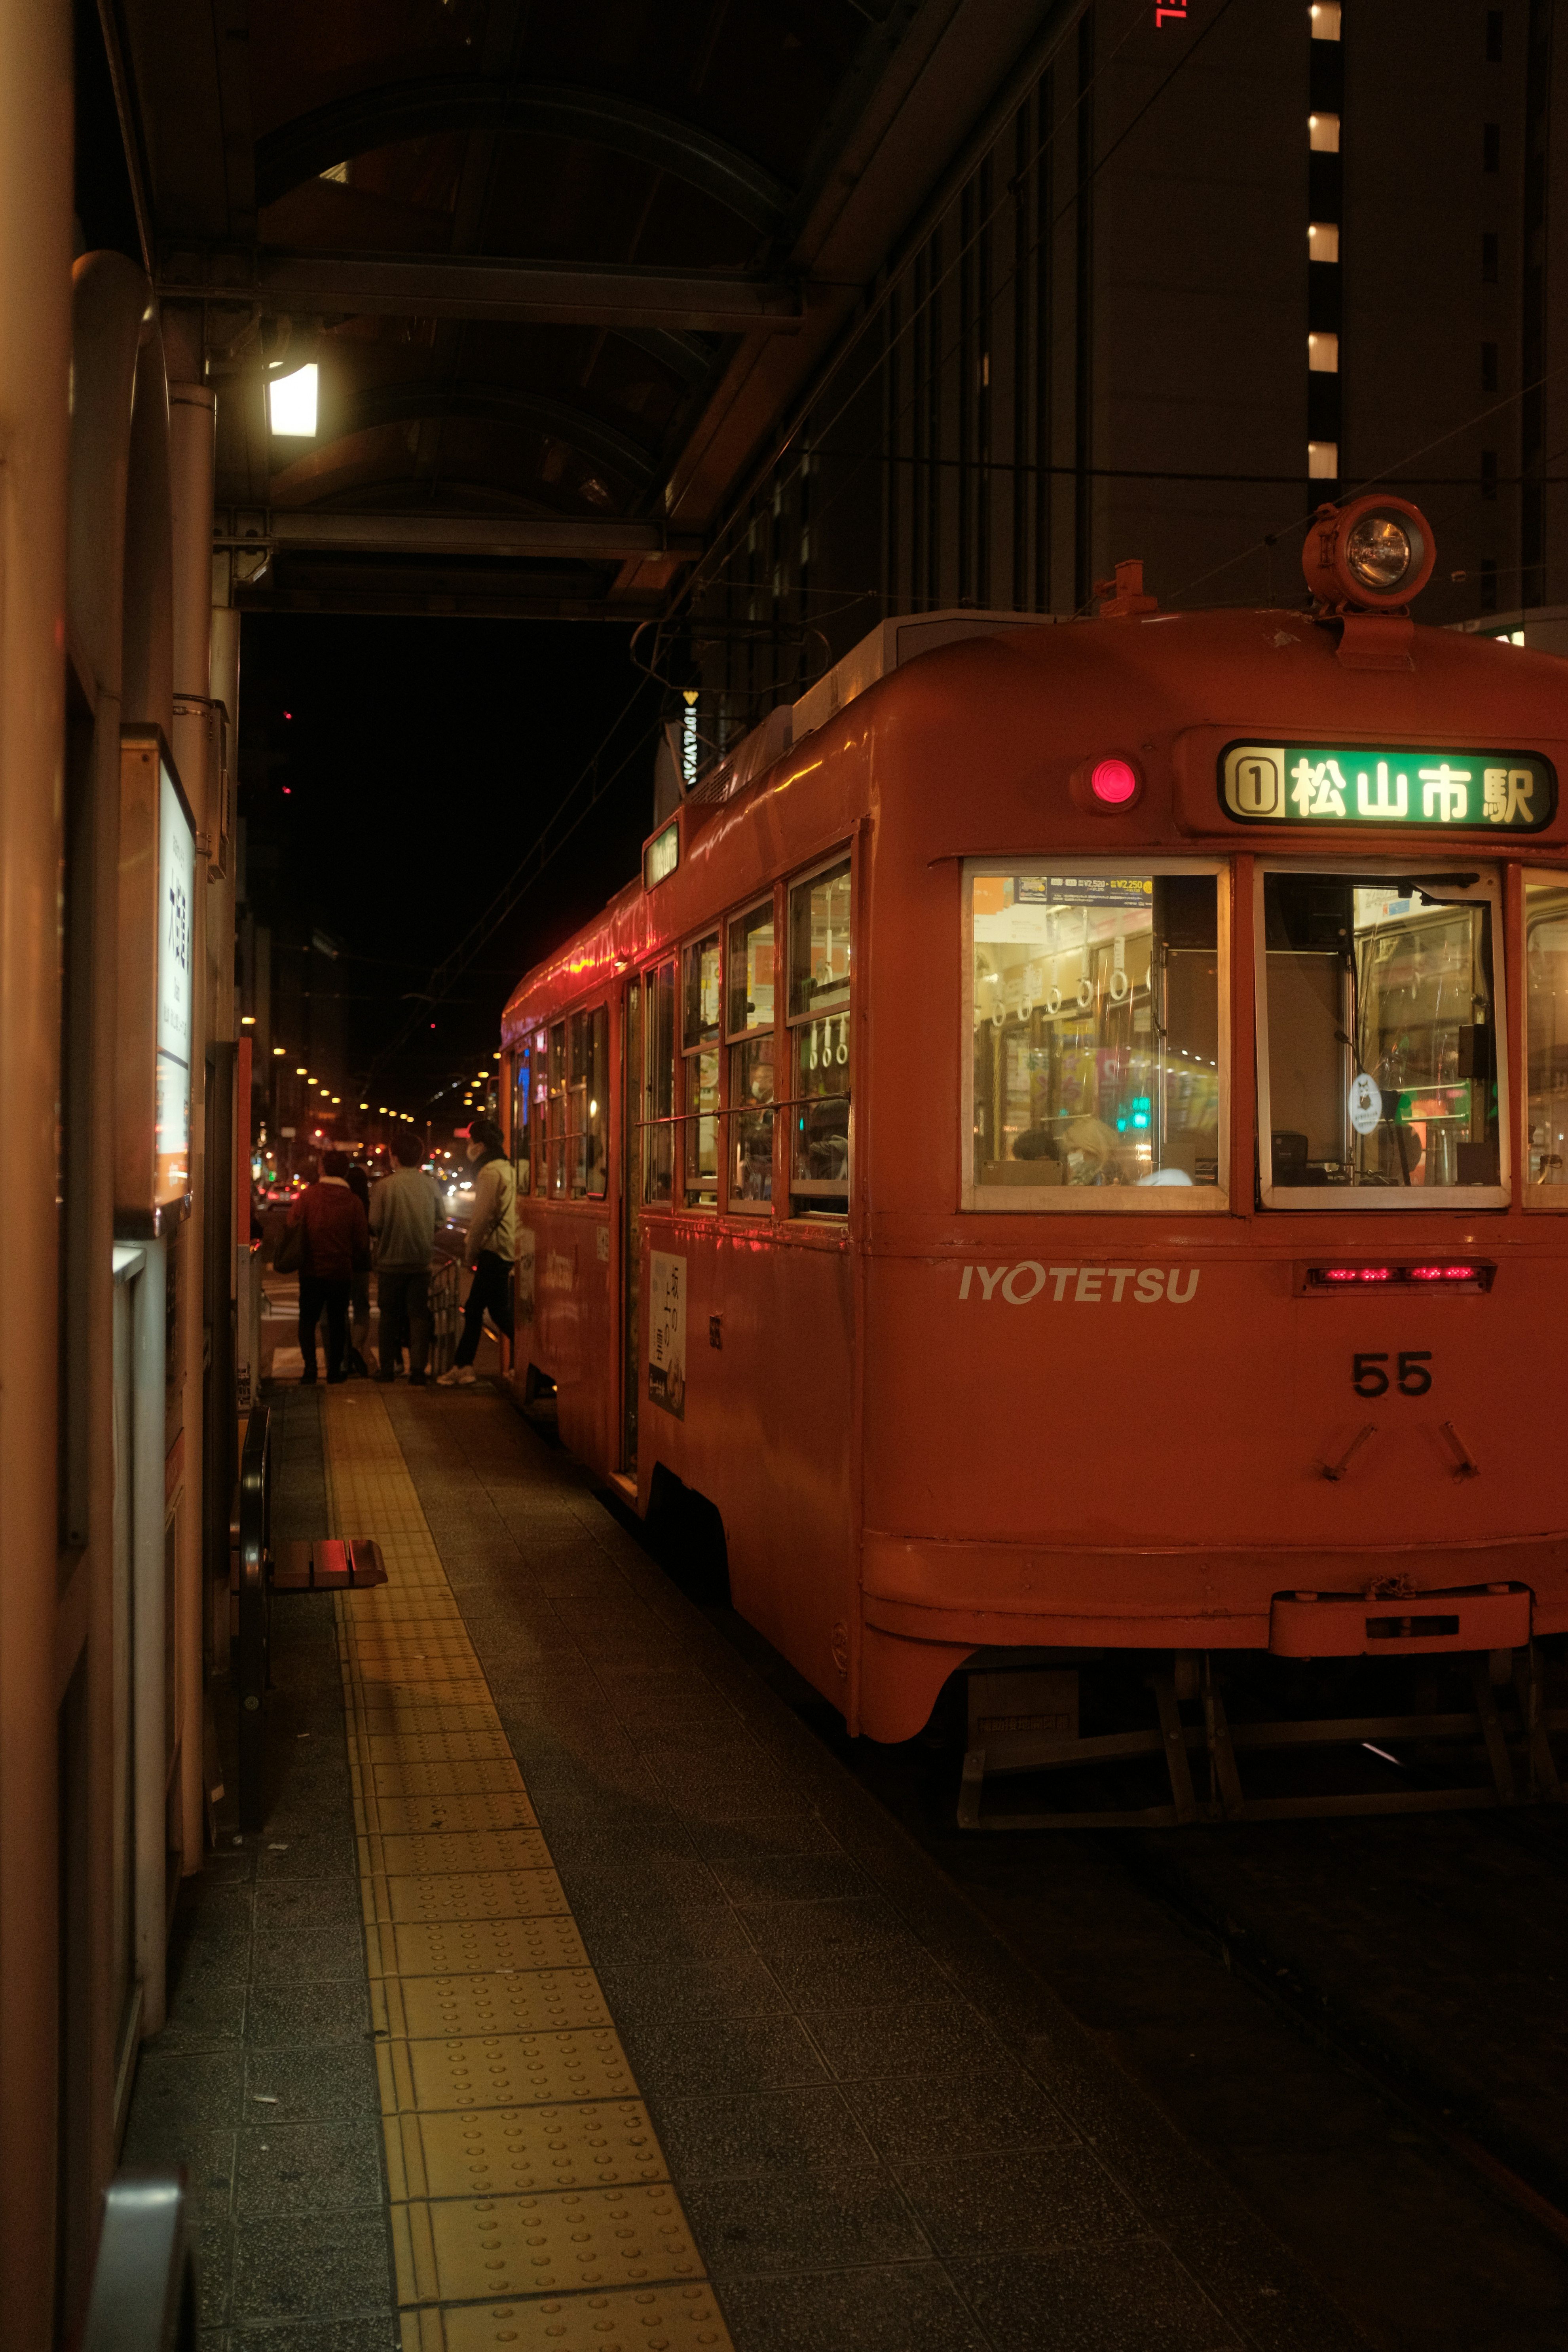 red tram on the street during night time